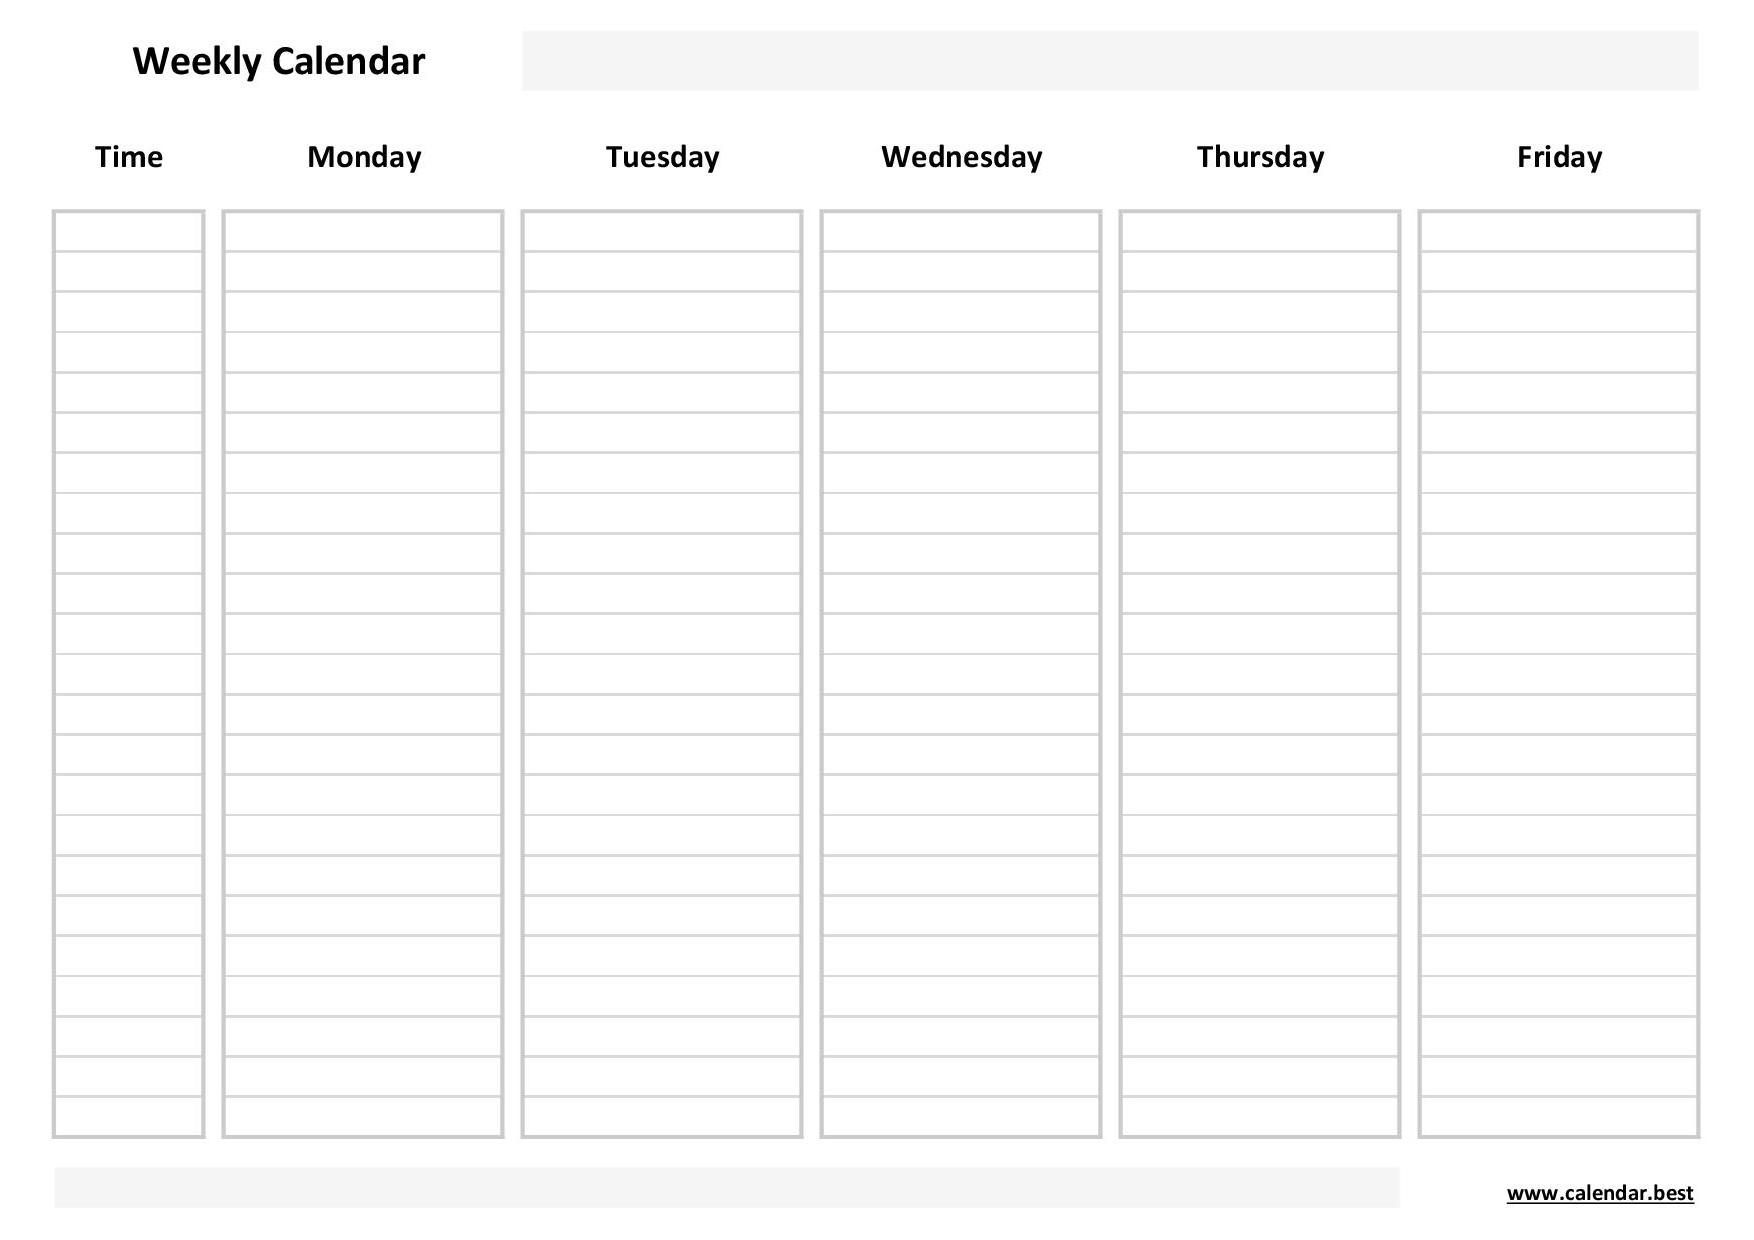 weekly calendar template with time slots 27